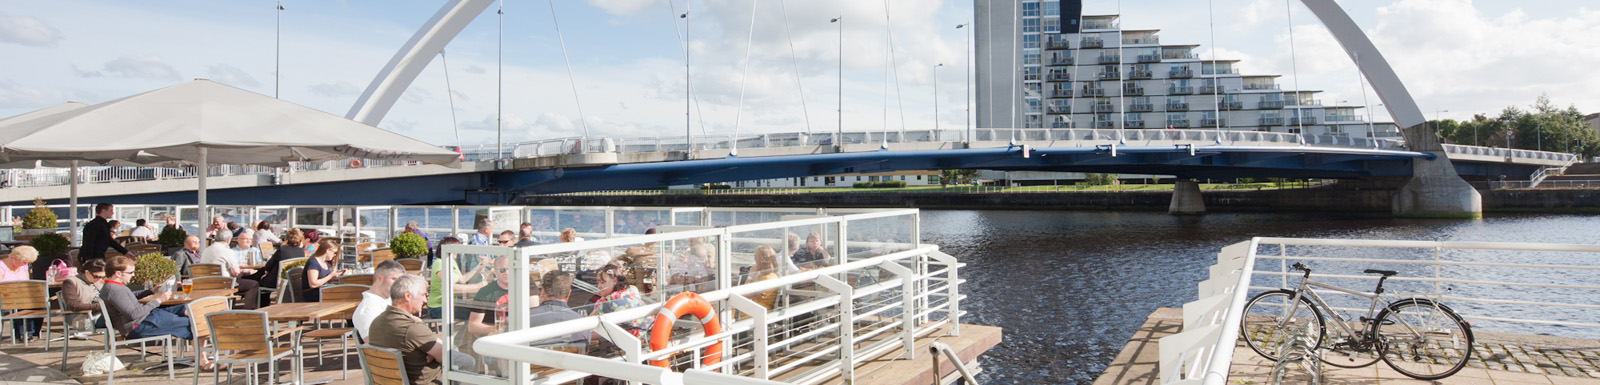 Al fresco dining at on the banks of the Clyde